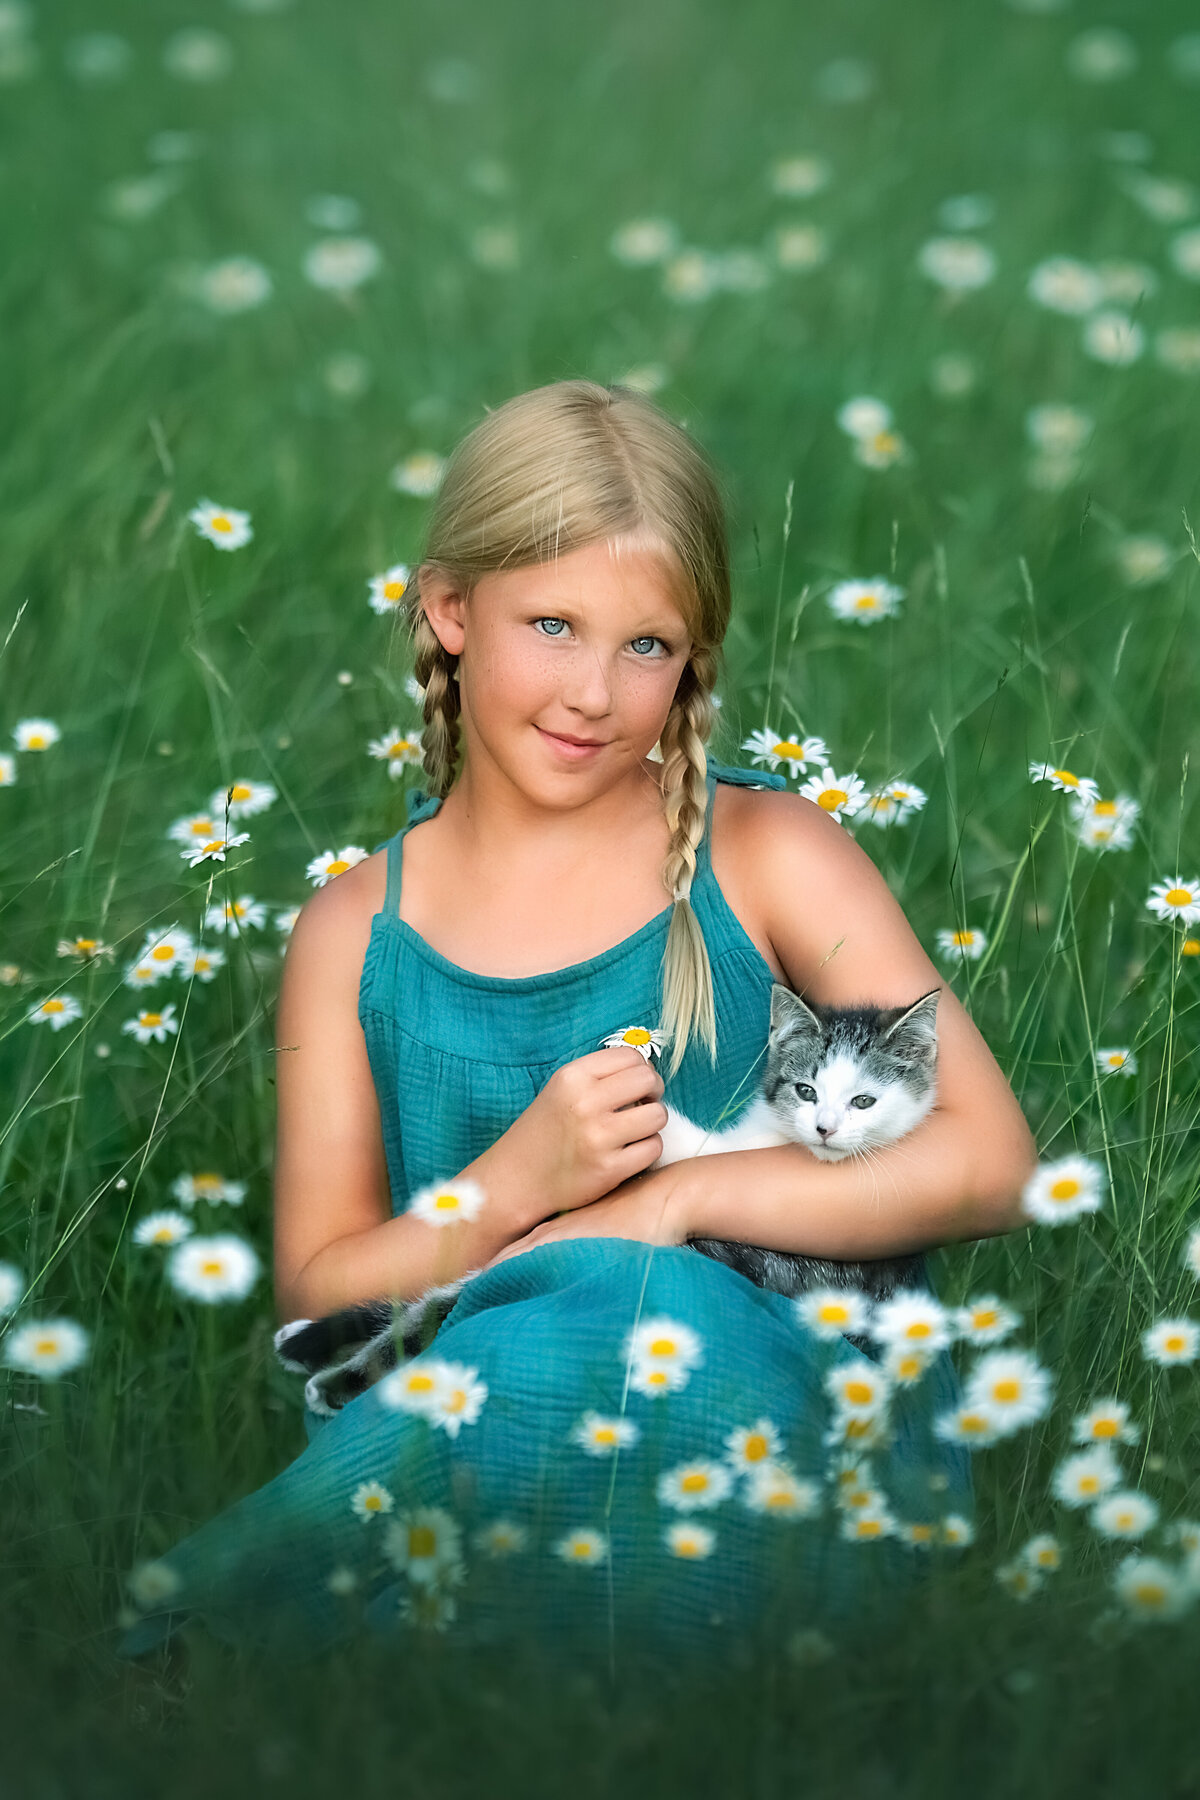 blue eye blond girl in teal dress holding a kitten and sitting in the field of daisy flowers.